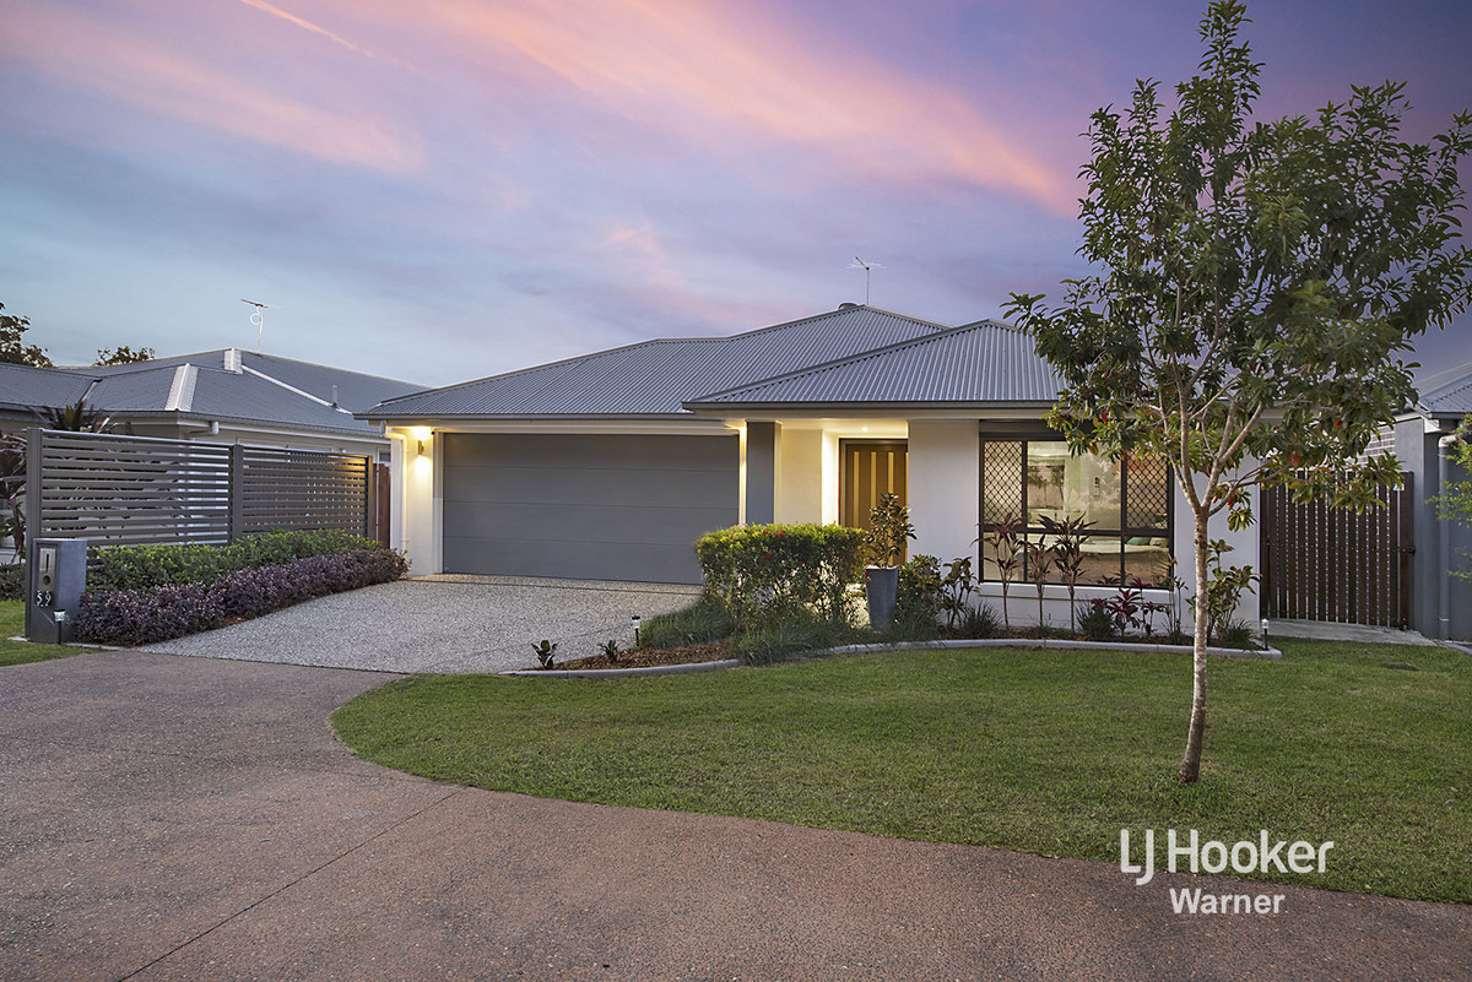 Main view of Homely house listing, 59 Gordon Circuit, Warner QLD 4500